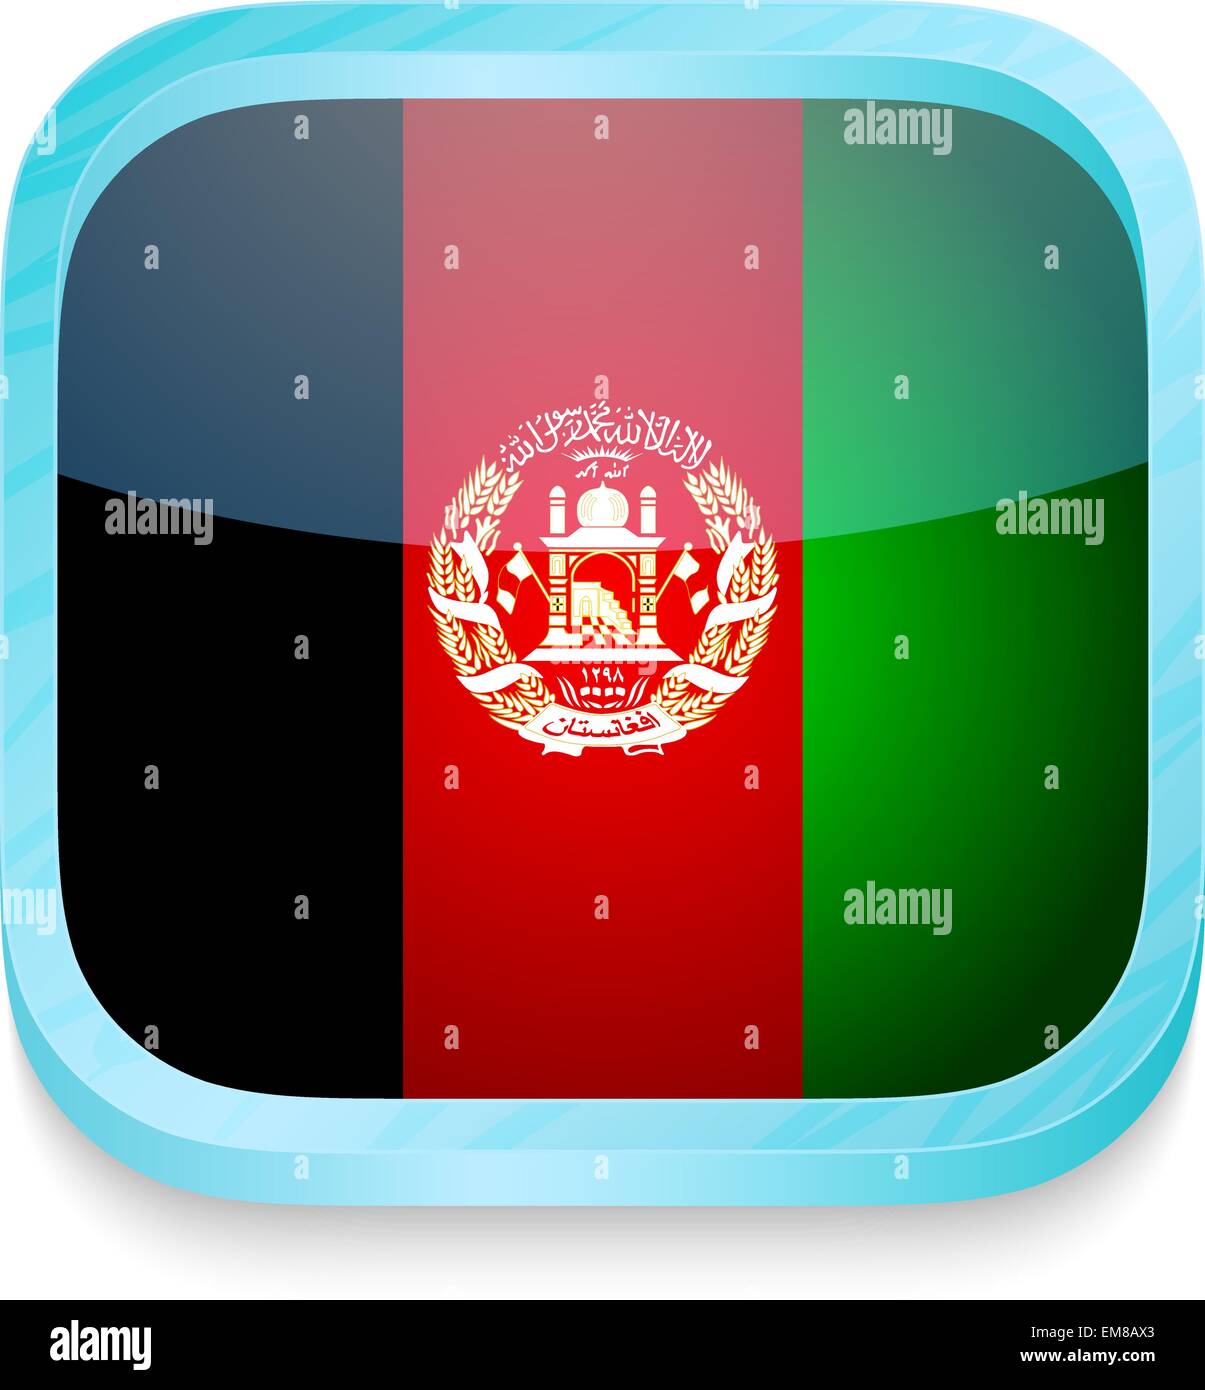 Smart phone button with Afghanistan flag Stock Vector